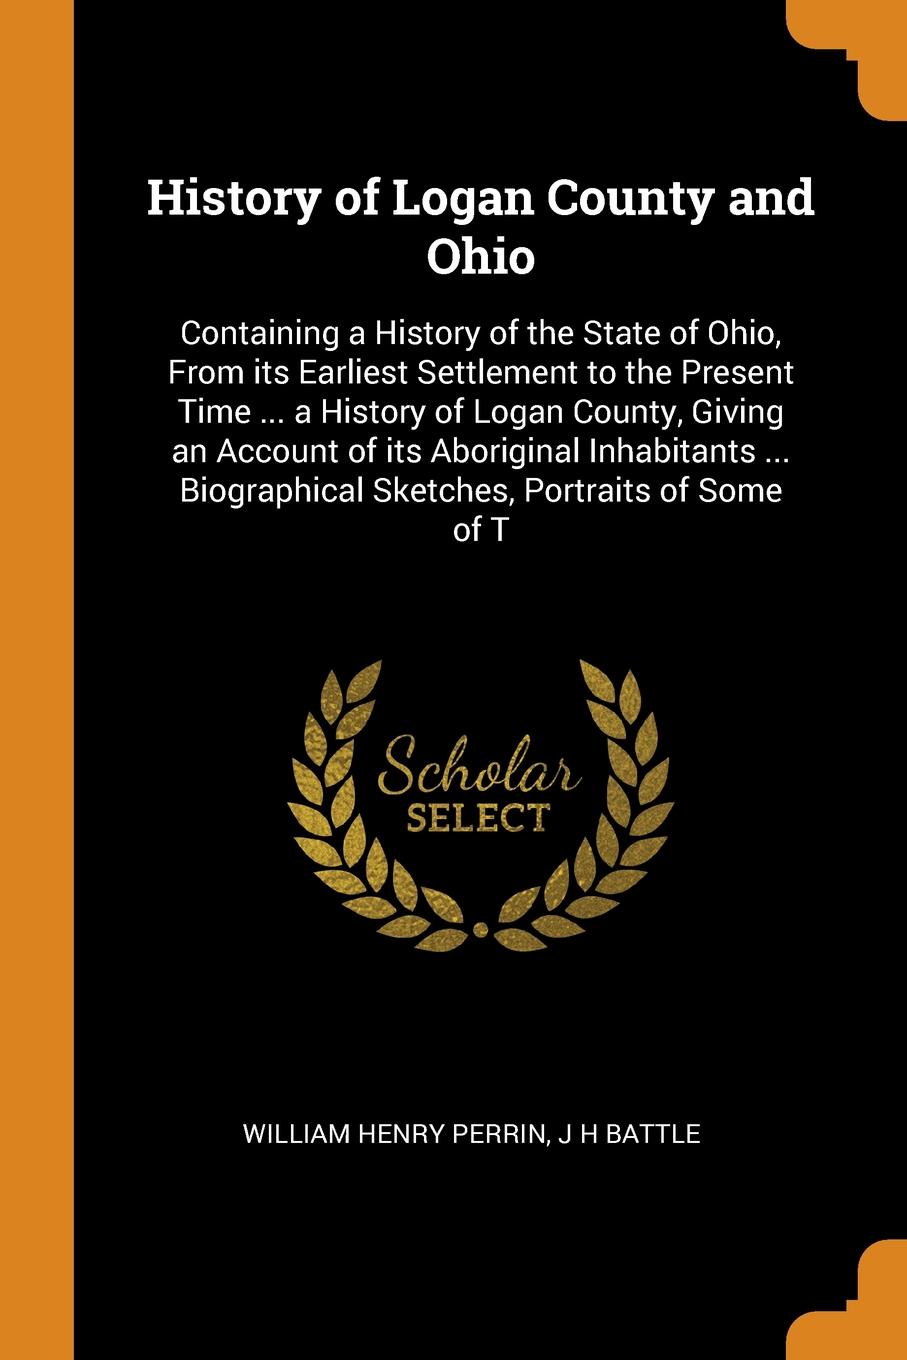 History of Logan County and Ohio. Containing a History of the State of Ohio, From its Earliest Settlement to the Present Time ... a History of Logan County, Giving an Account of its Aboriginal Inhabitants ... Biographical Sketches, Portraits of So...